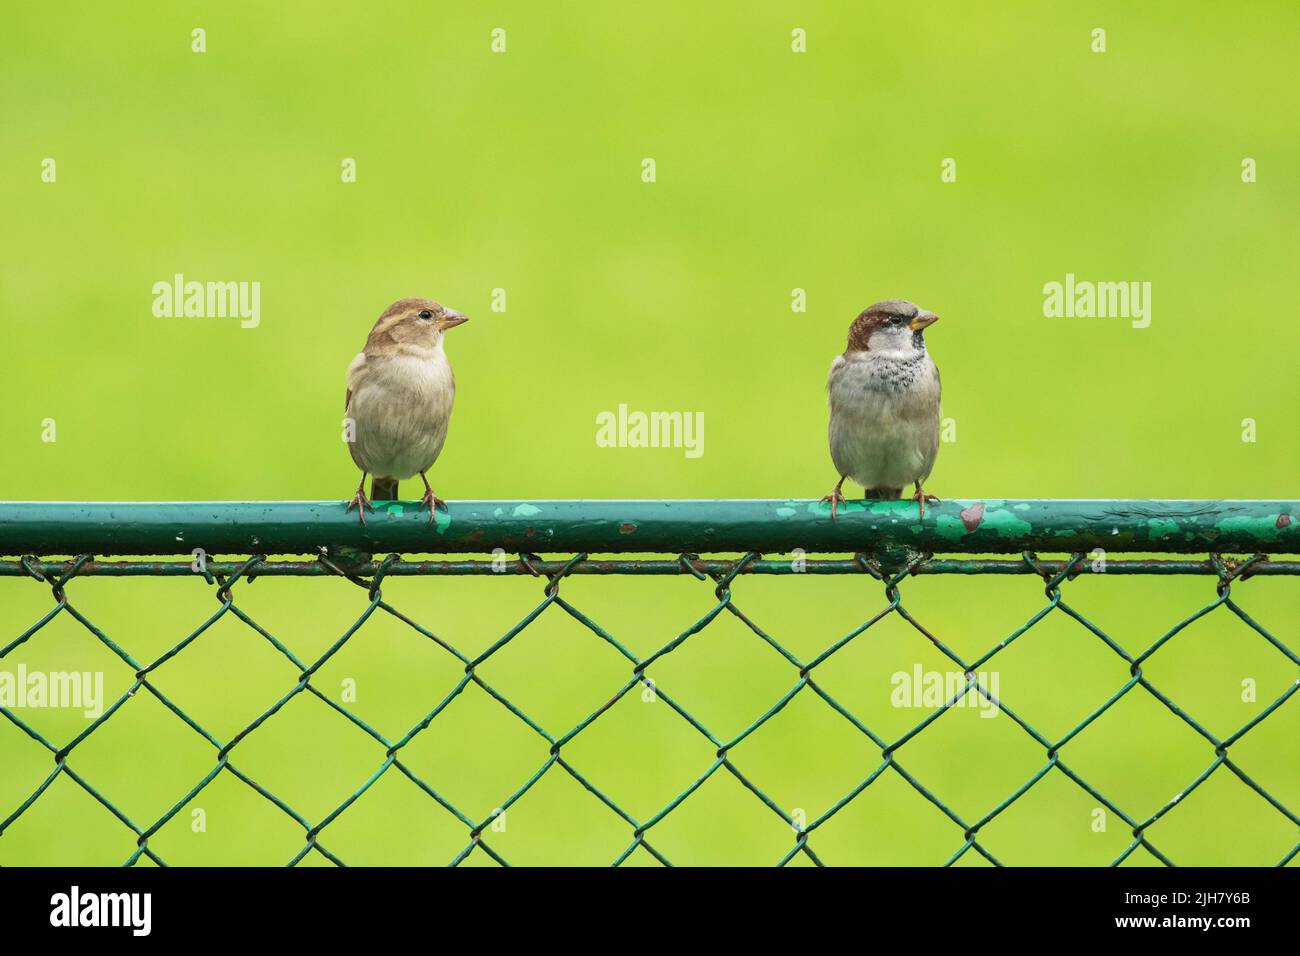 Two House sparrows standing on a metal gate on a summer day in Europe Stock Photo